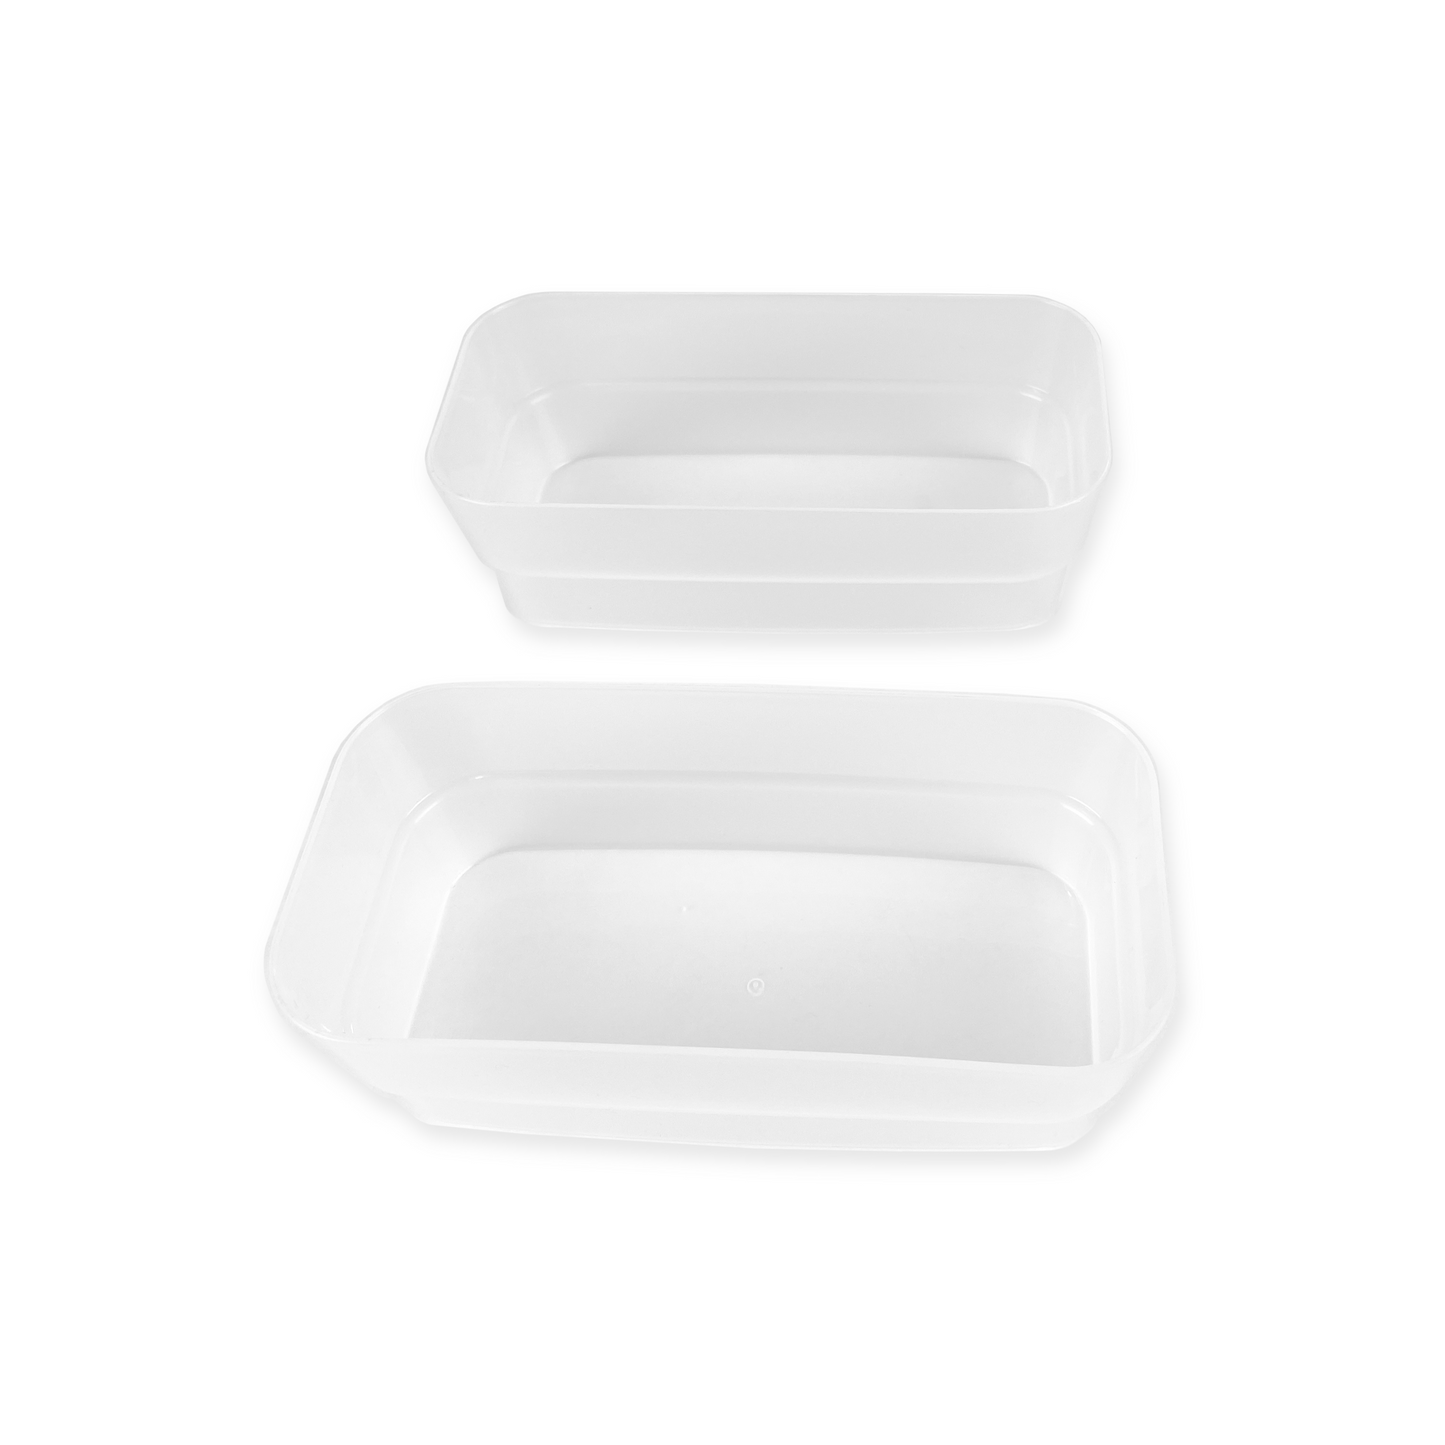 Single RACK & TRAY SET For HOUSEHOLD (8 PIECES!) or as Add-On WITH FREE SHIPPING! (Scroll Over Image)